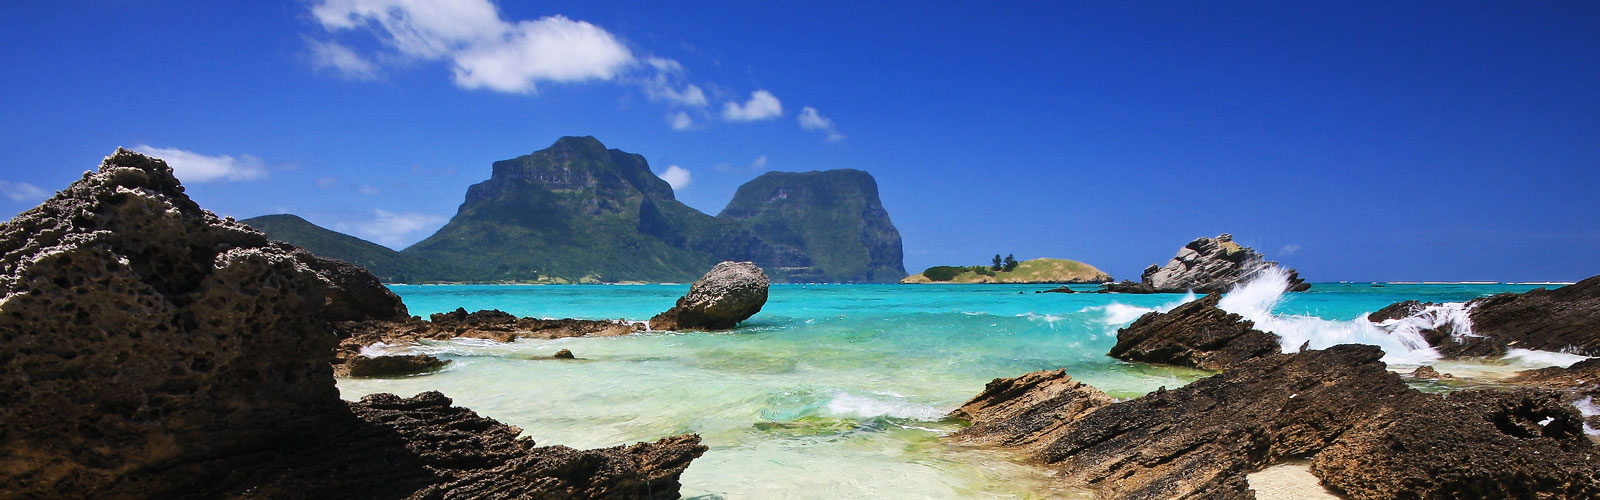 Lord Howe Island Facts